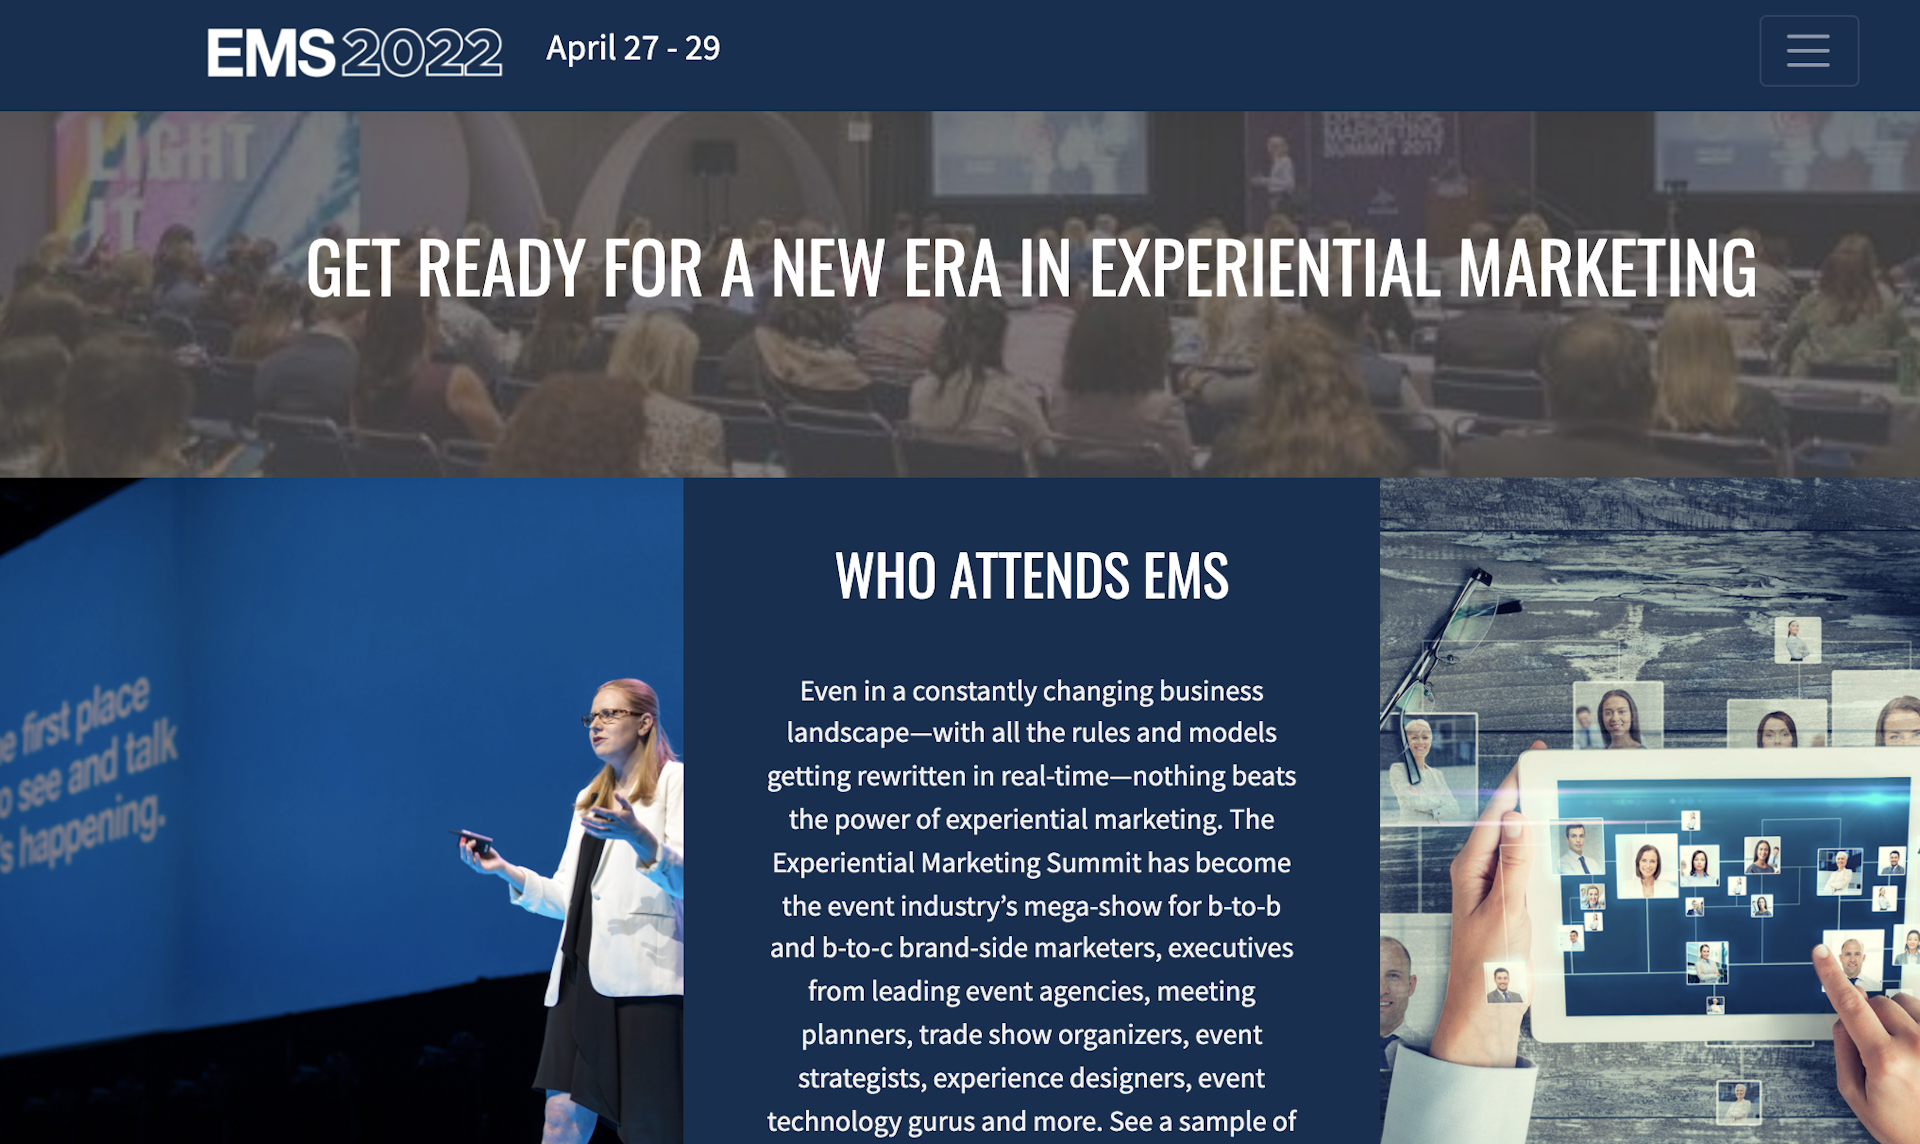 The 2022 Experiential Marketing Summit registration page